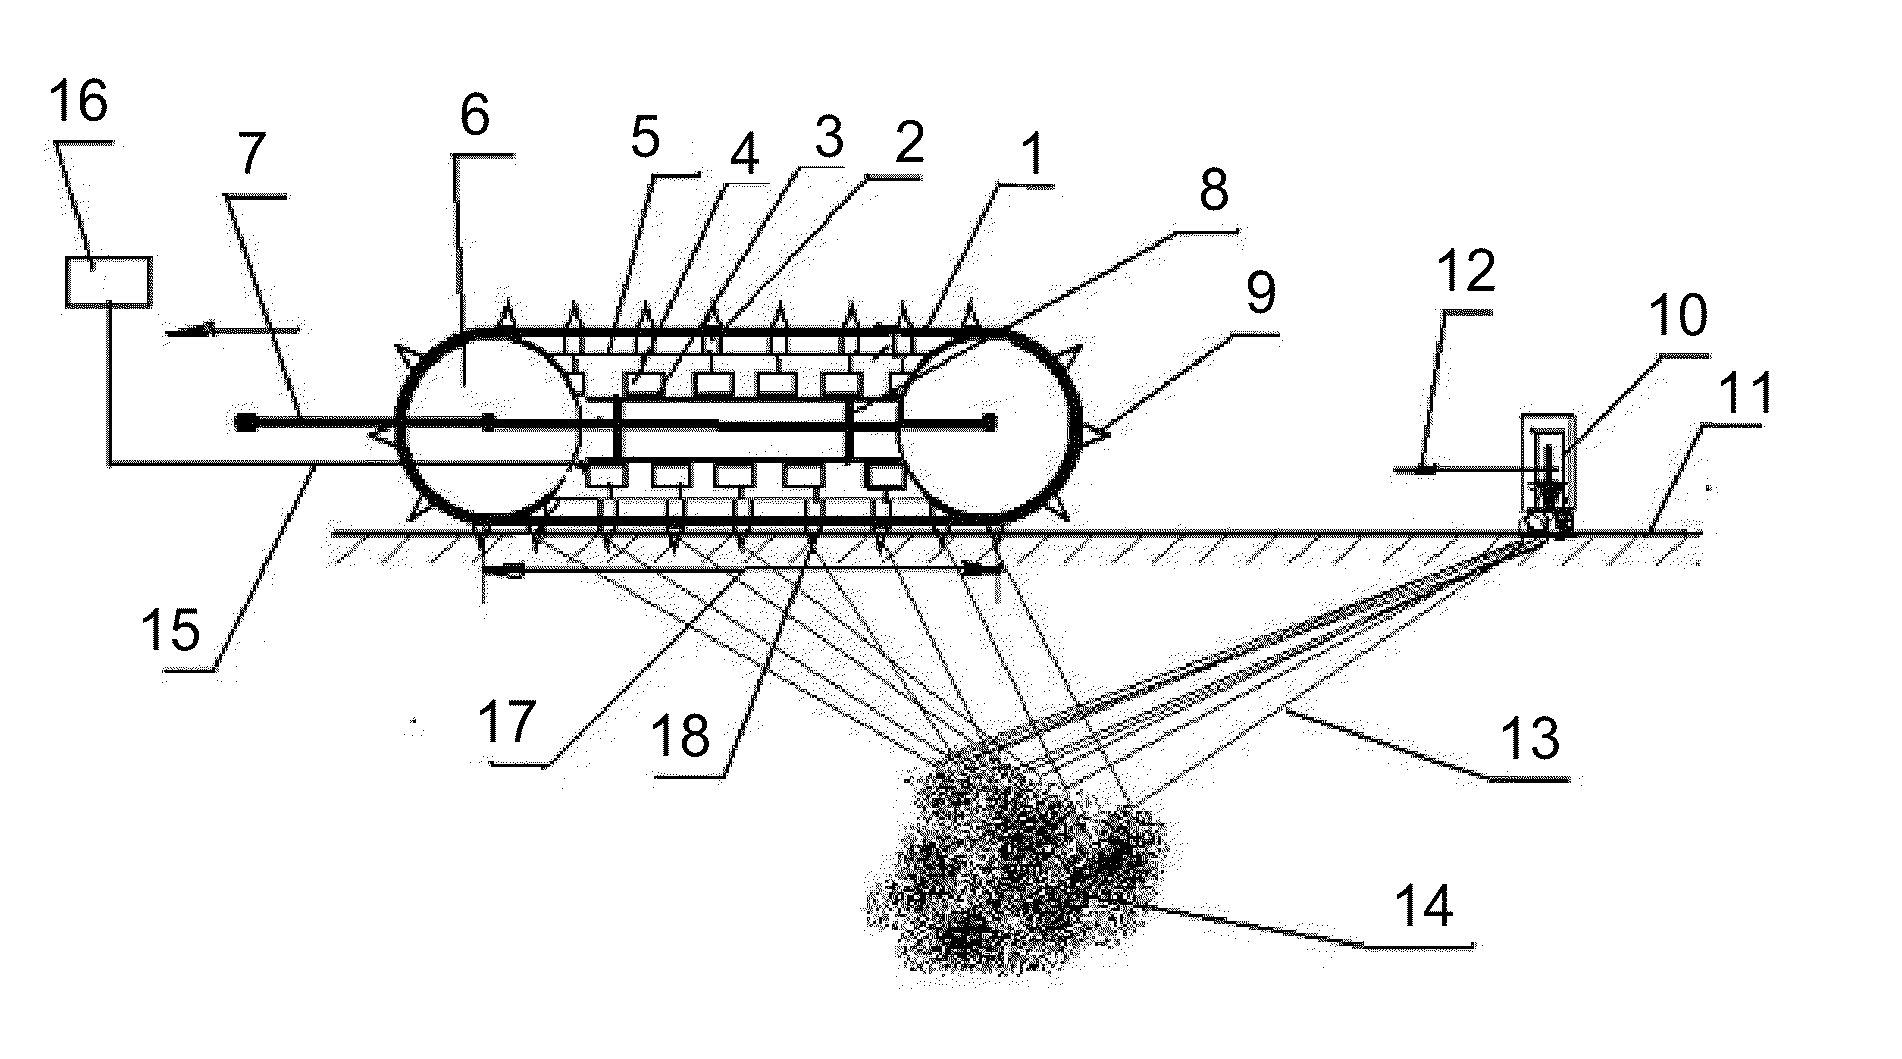 Seismic sensor array devices and methods of data collection